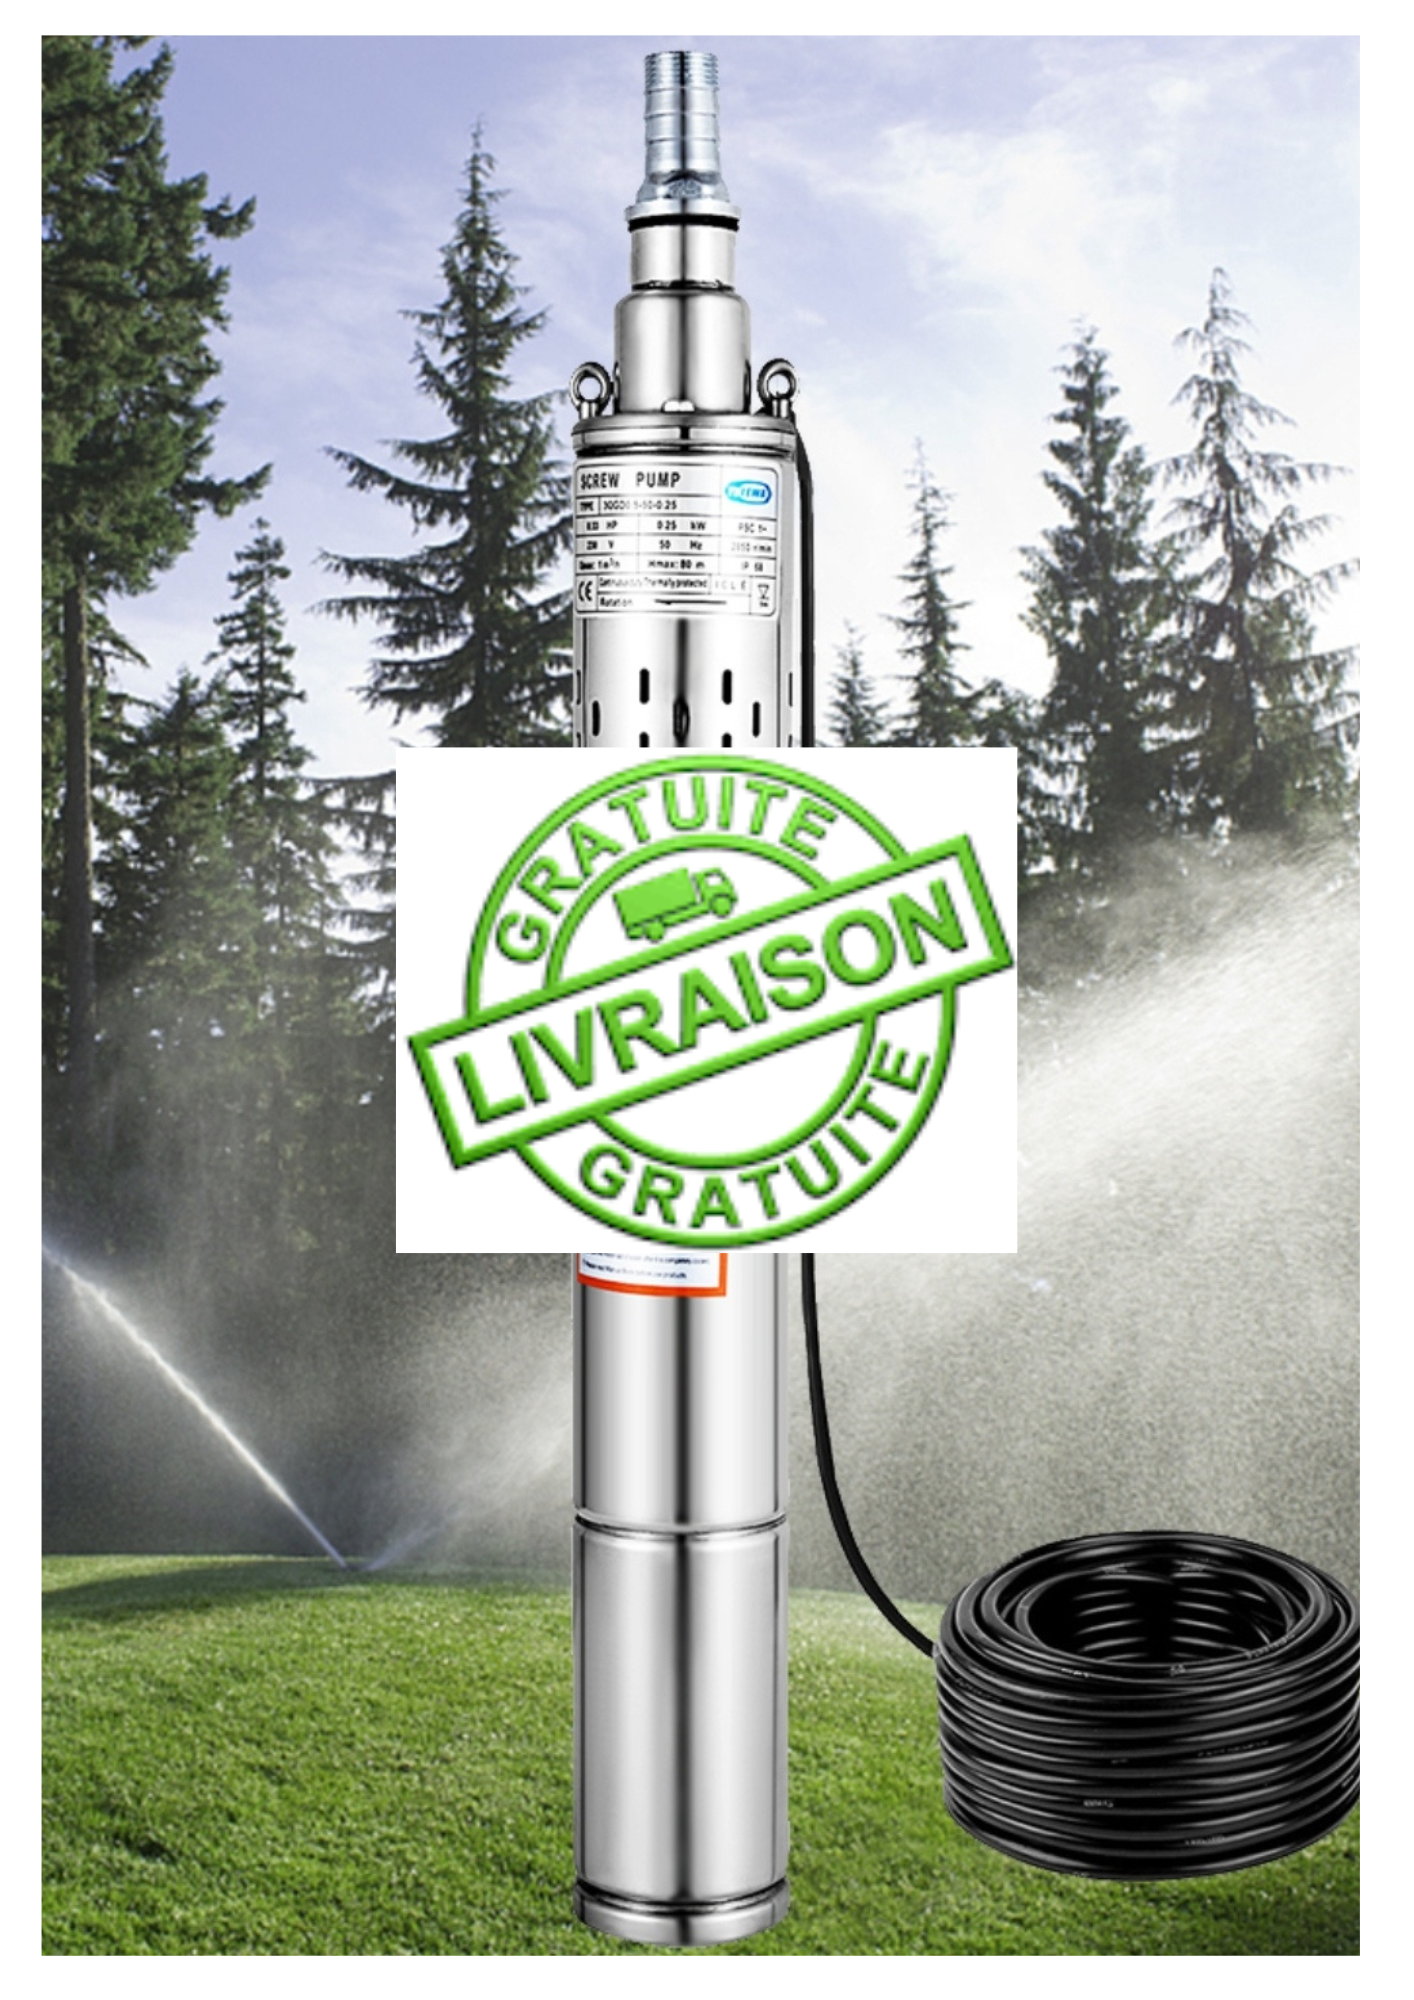 Stainless steel submersible pump for irrigation and water supply.